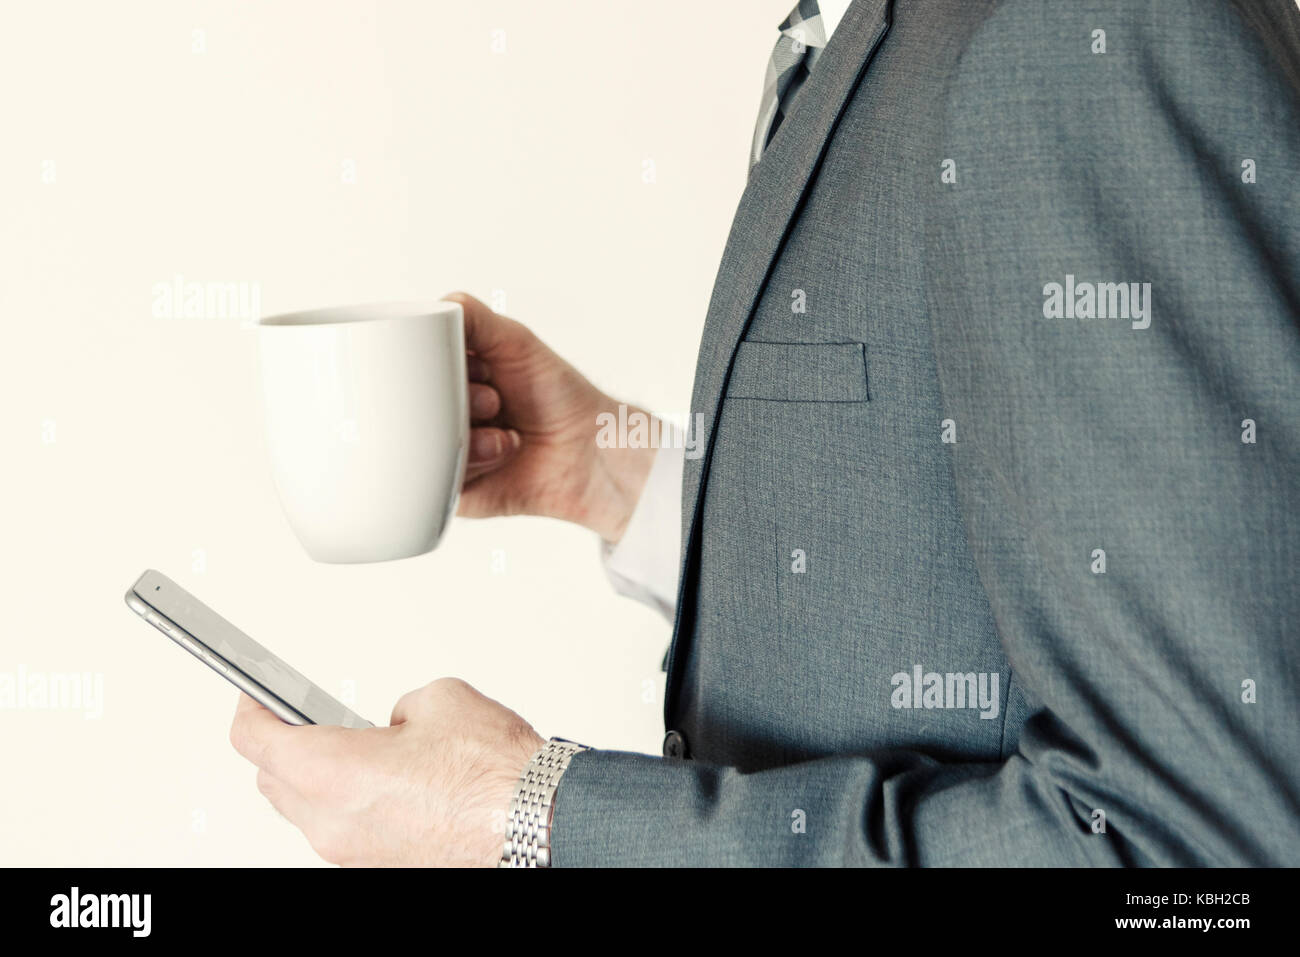 Headless Professional businessman profile side view using smart mobile phone while holding a cup of coffee in office horizontal. Stock Photo